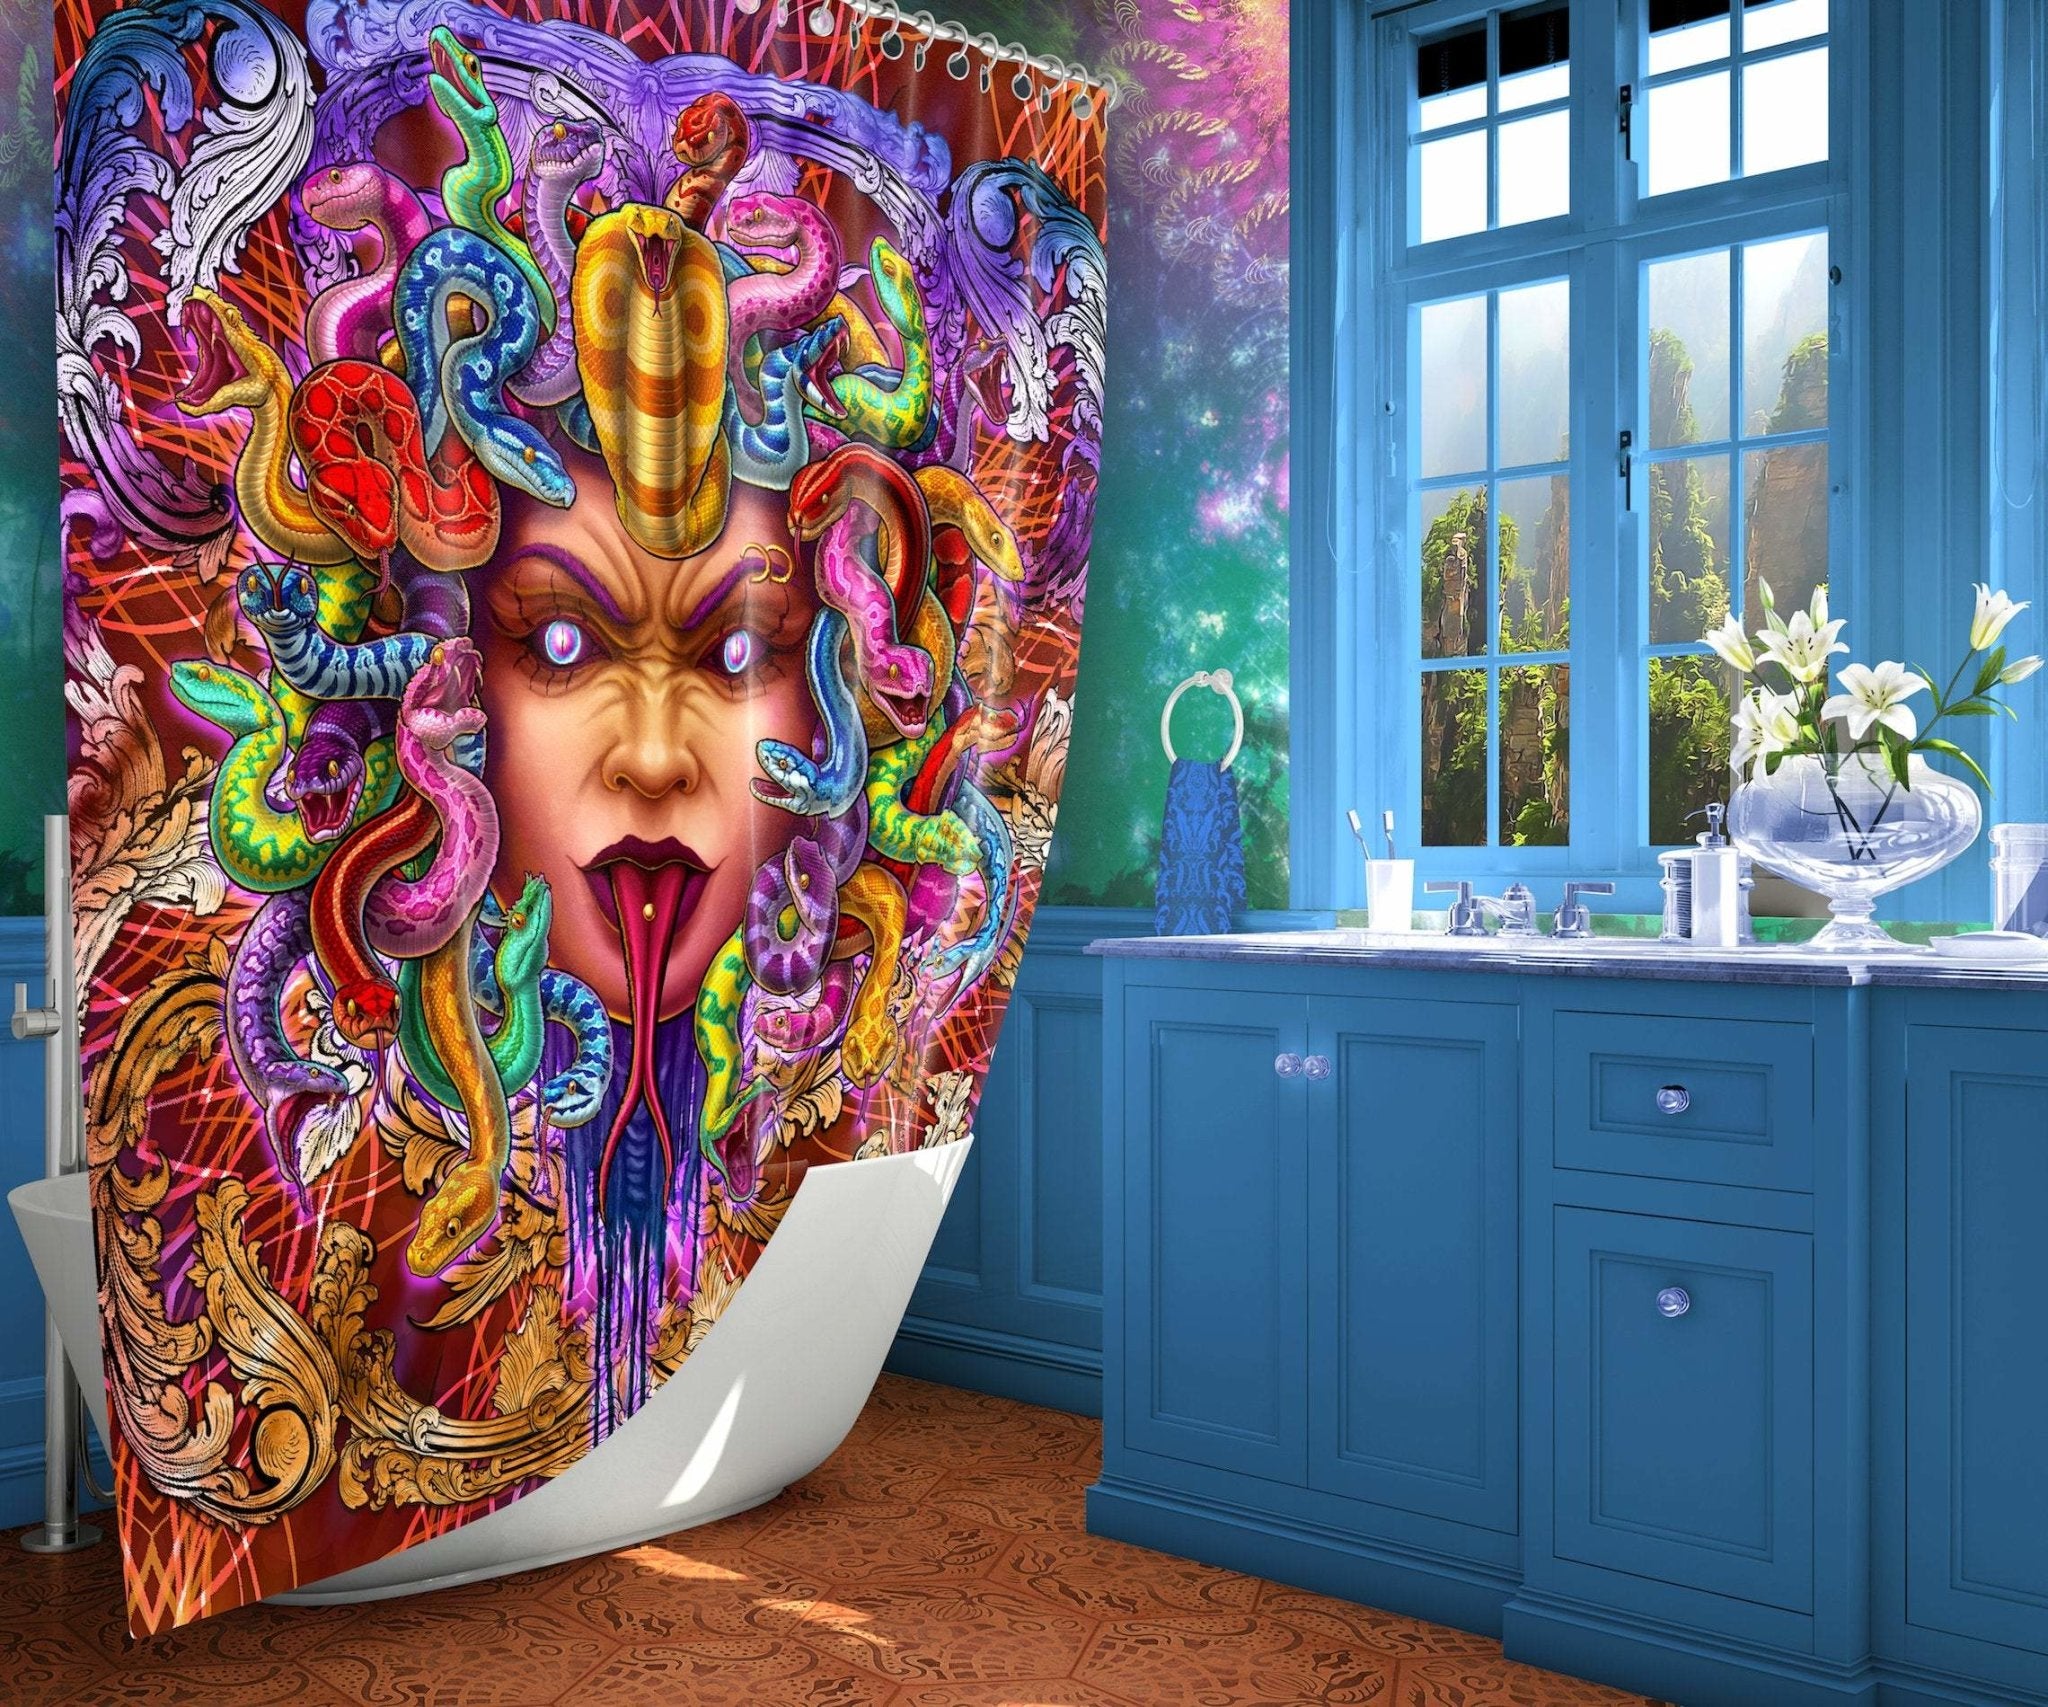 Psychedelic Shower Curtain, Alternative and Indie Bathroom Decor, Fantasy Kidcore - Psy Snakes, Mocking - Abysm Internal